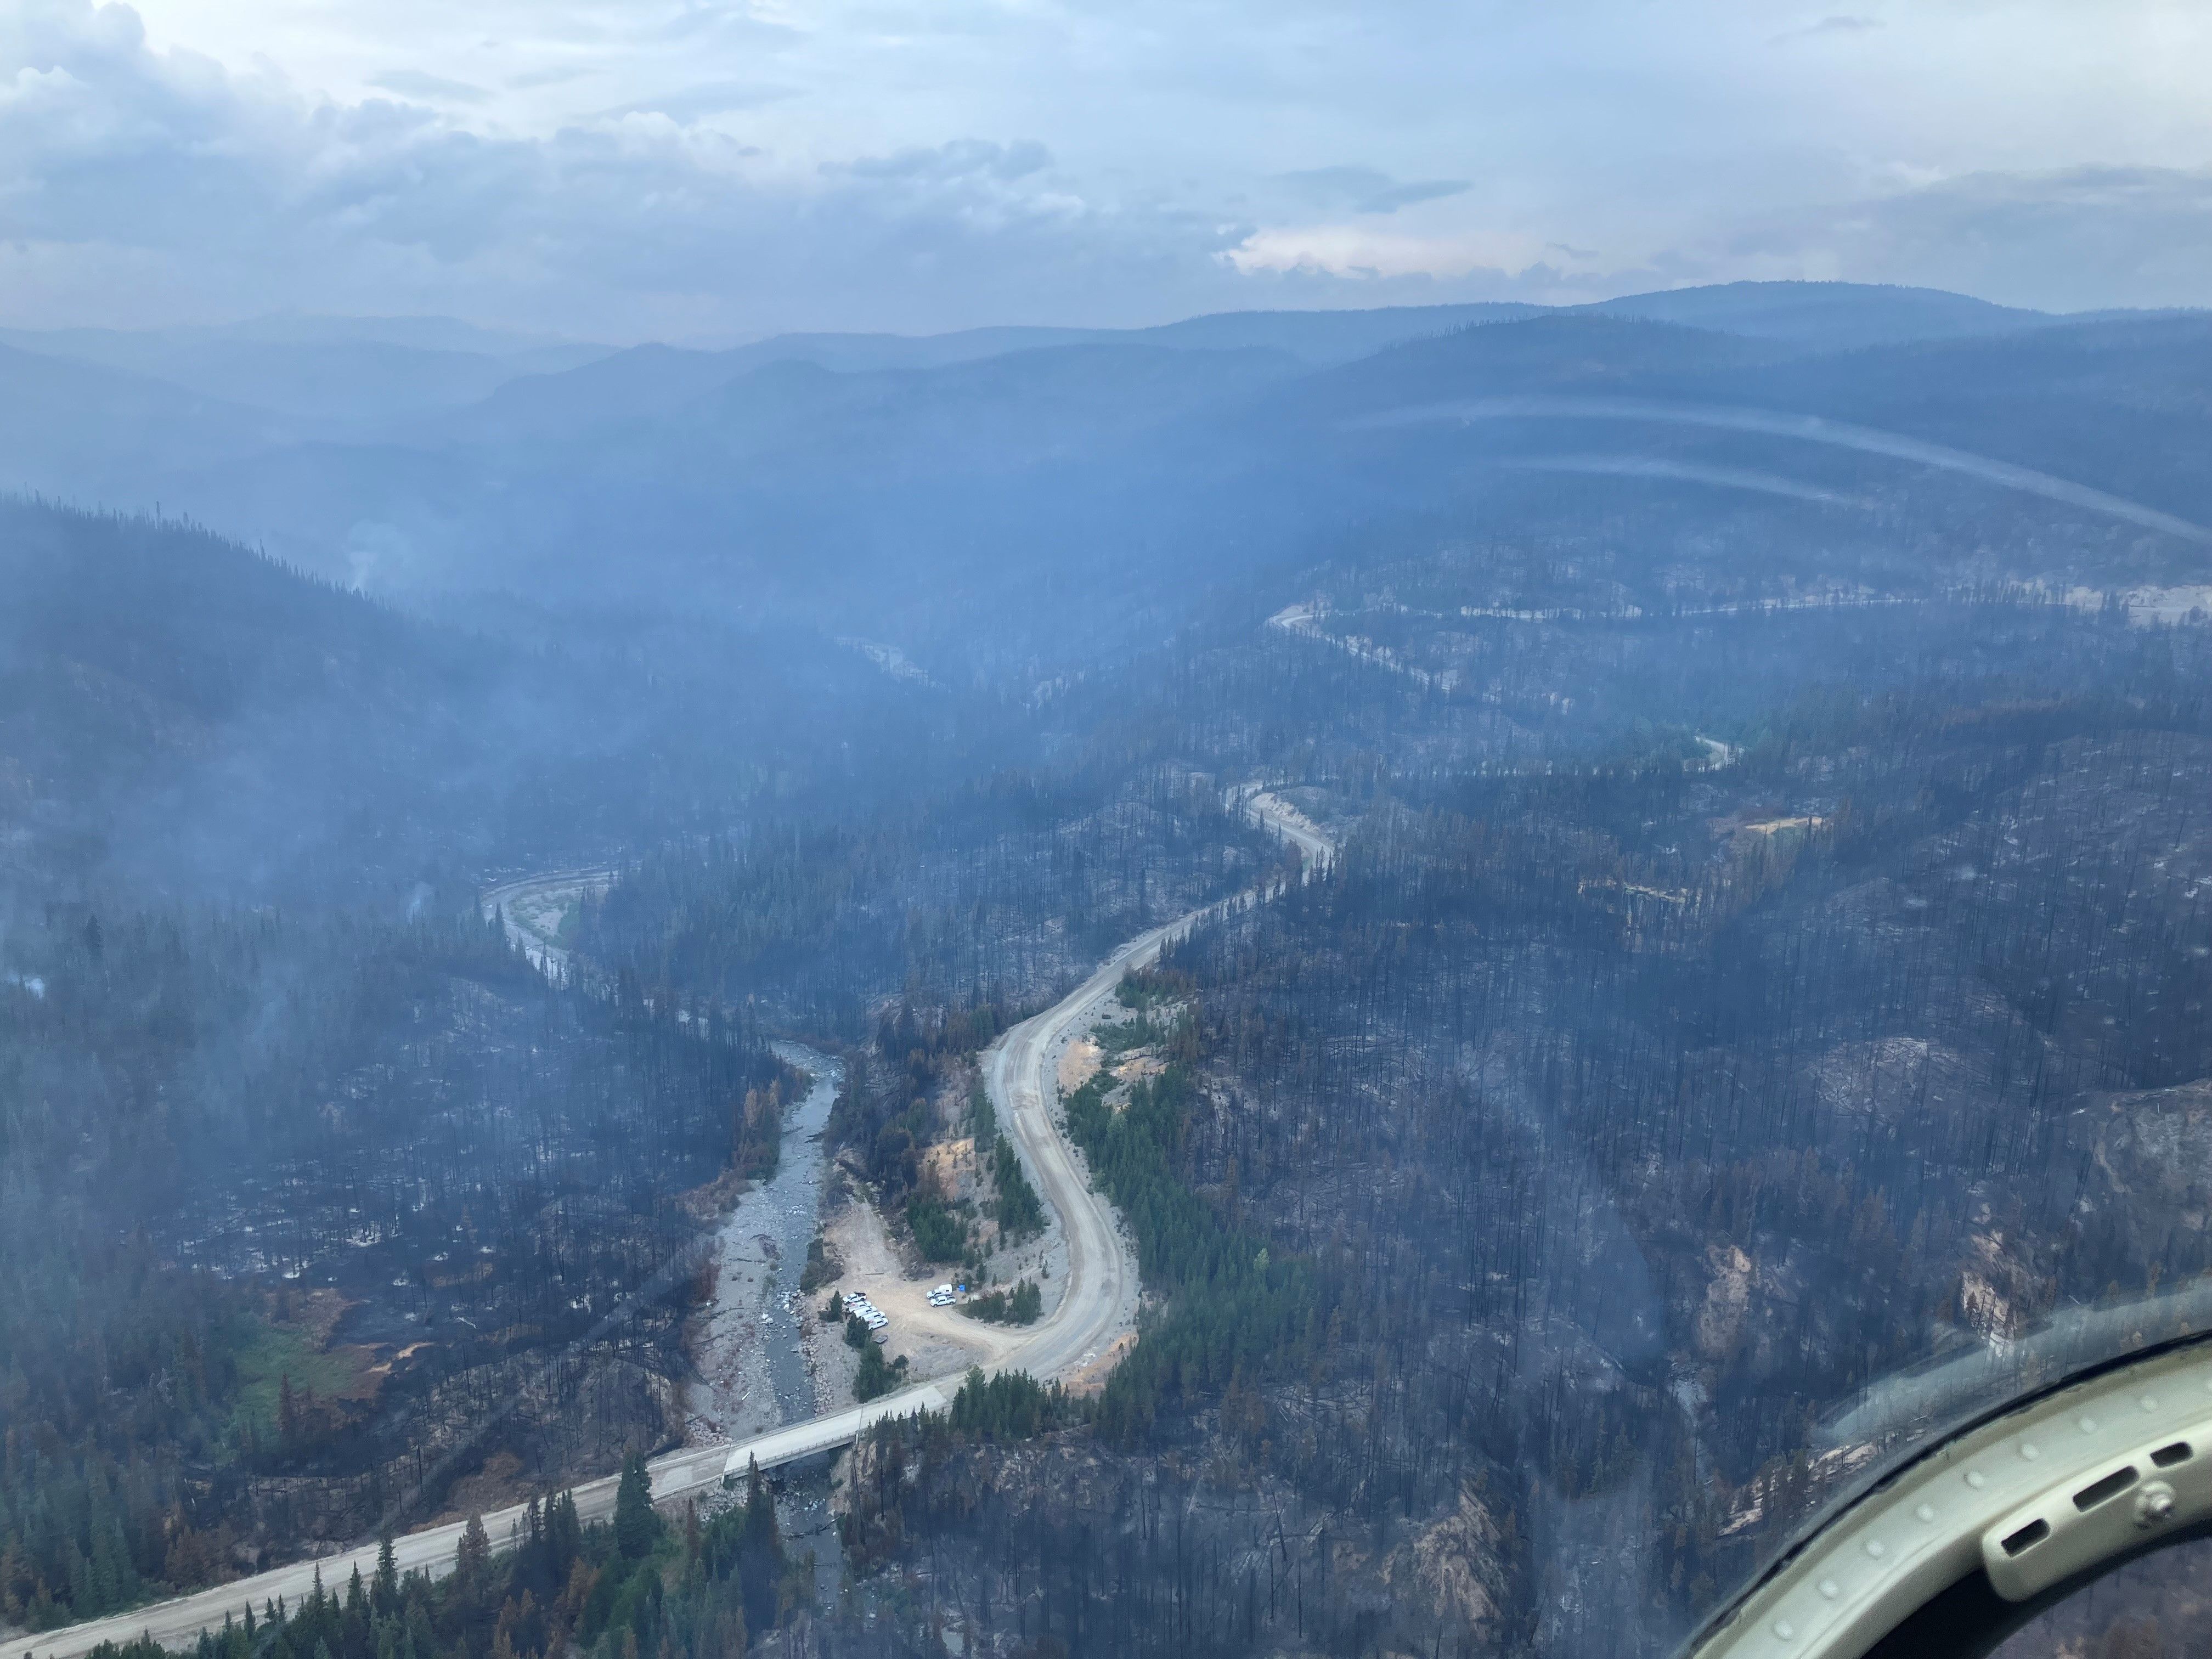 The Young Creek (VA1735) wildfire, which is located within Tweedsmuir Park and approximately 35 kilometres west of Anahim Lake near Heckman Pass, in British Columbia, Canada, on July 25.